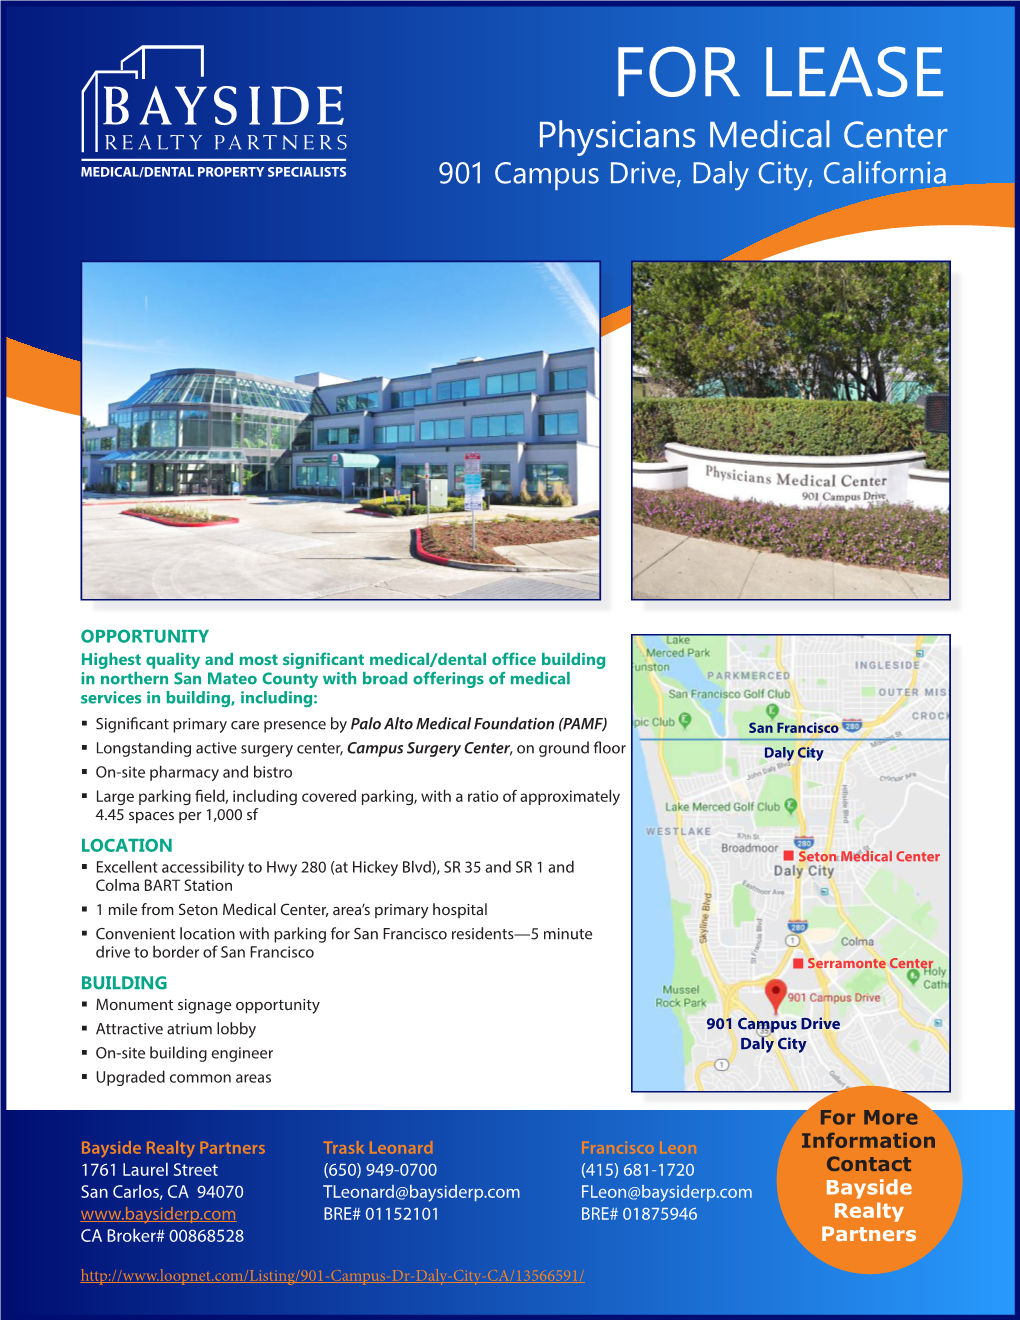 FOR LEASE Physicians Medical Center MEDICAL/DENTAL PROPERTY SPECIALISTS 901 Campus Drive, Daly City, California